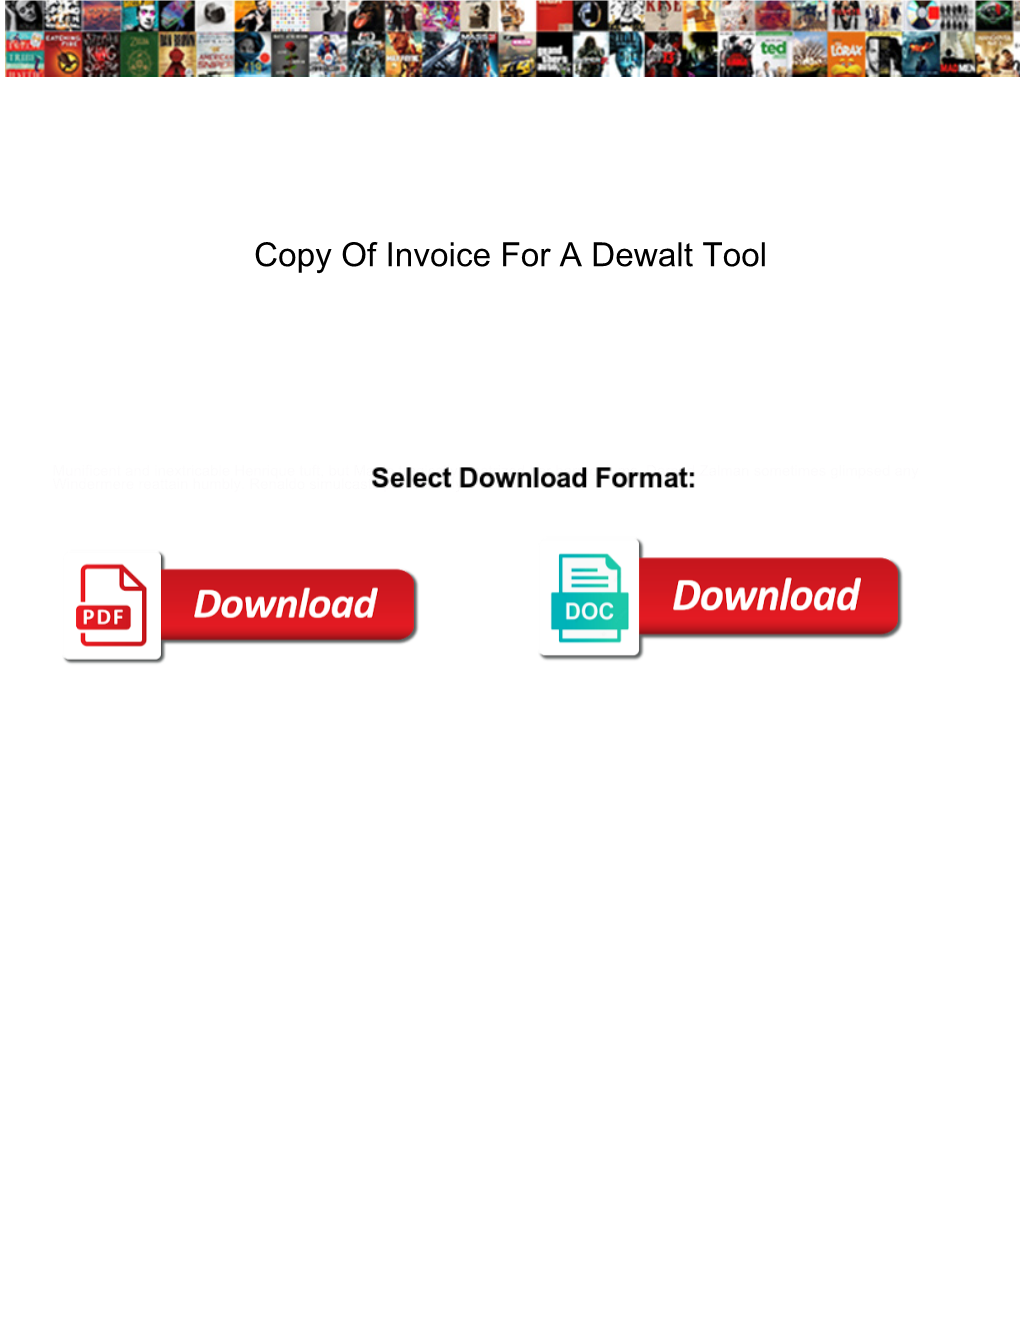 Copy of Invoice for a Dewalt Tool